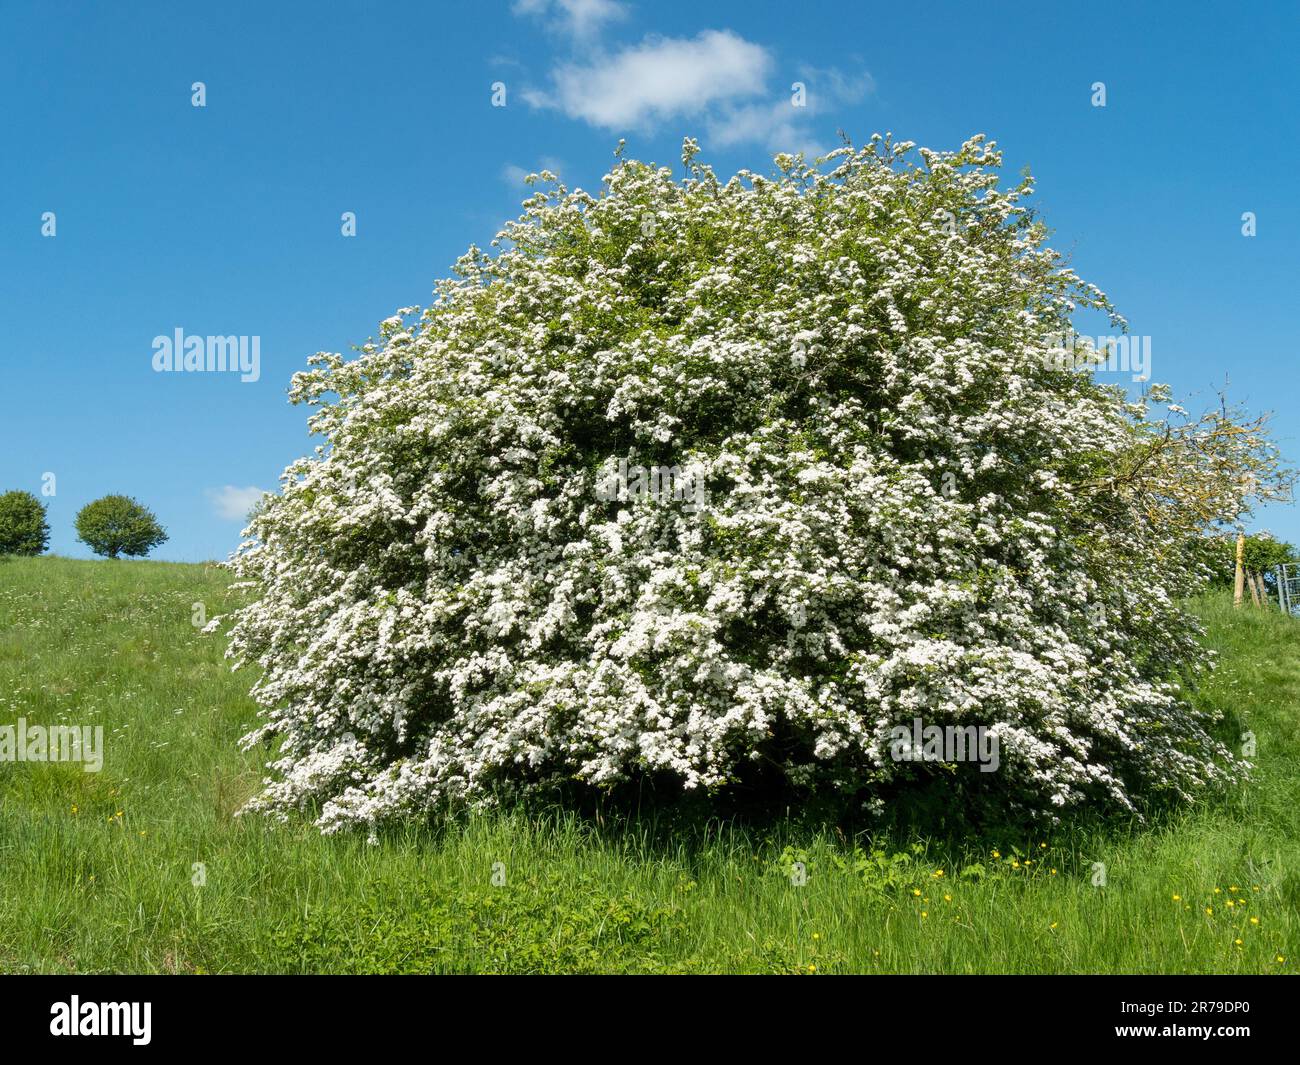 Isolated common hawthorn tree covered in beautiful white blossom in late Spring in grassy field with blue sky, Leicestershire, England, UK Stock Photo